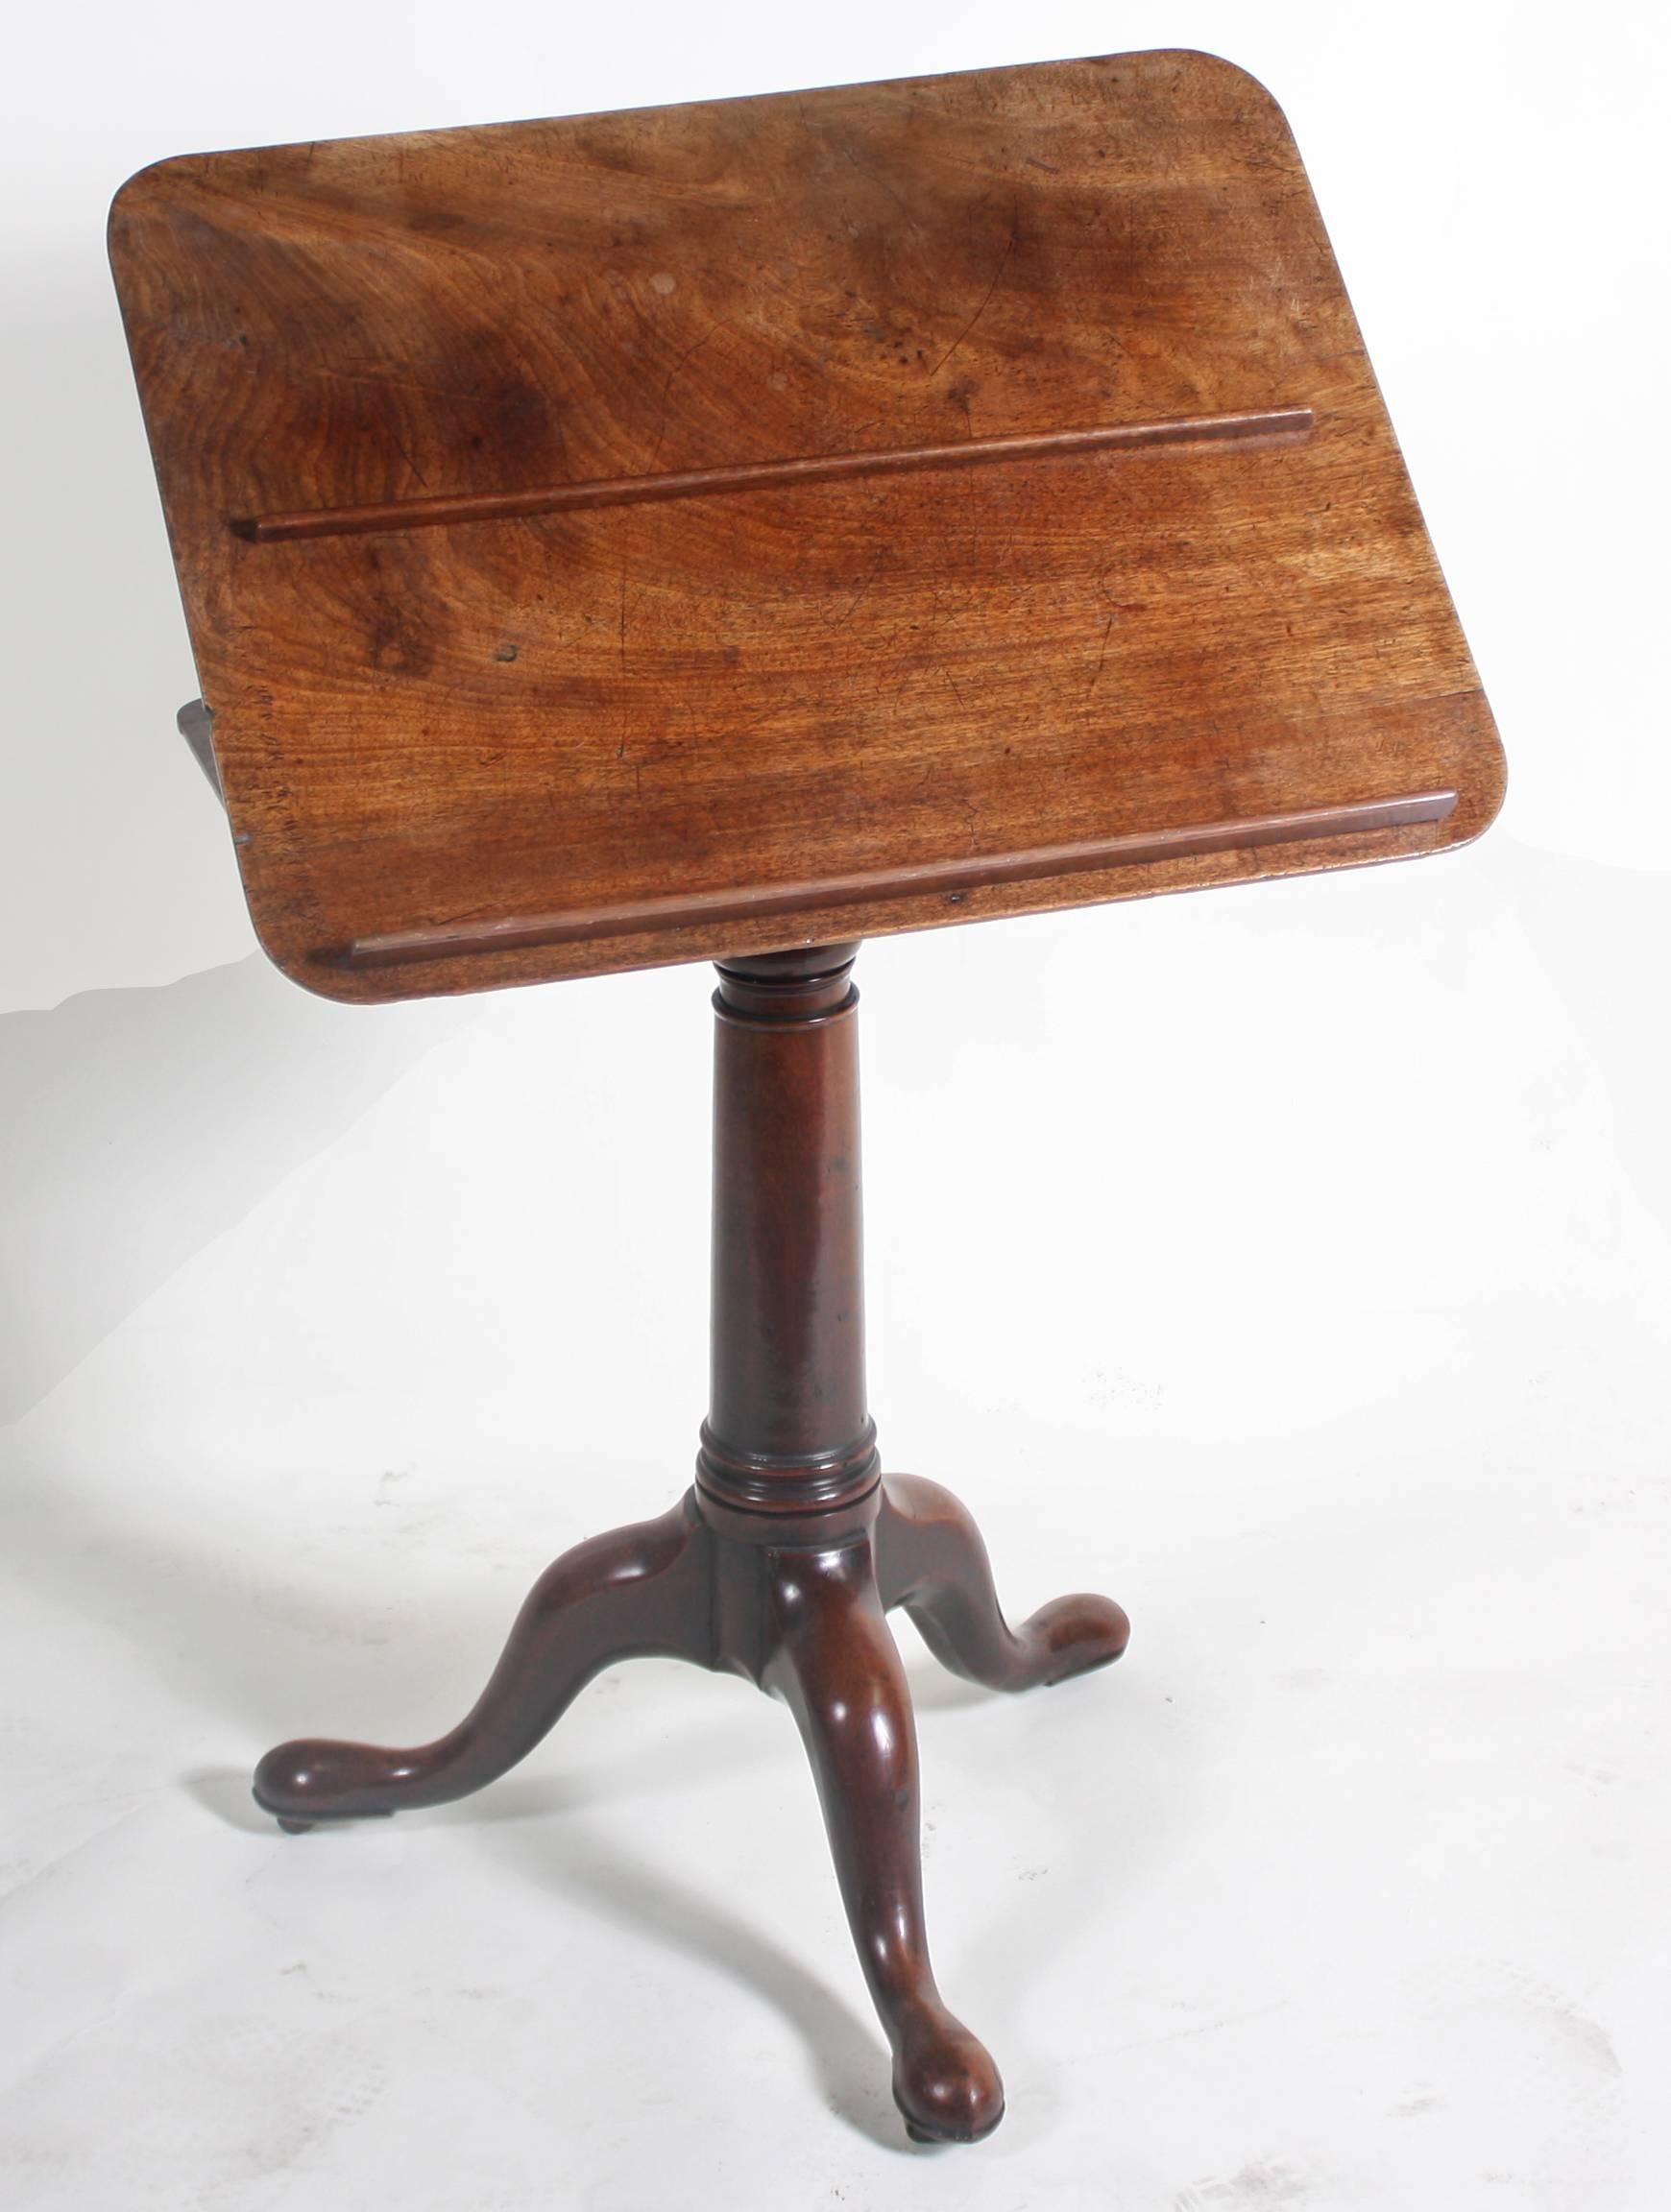 A small mahogany table with easel top to aid one in reading etc. Made in England or UK, circa 1750. Standing on graceful cabriole legs with casters. The rectangular top supported by a well turned and tapered pedestal. This table comes from the